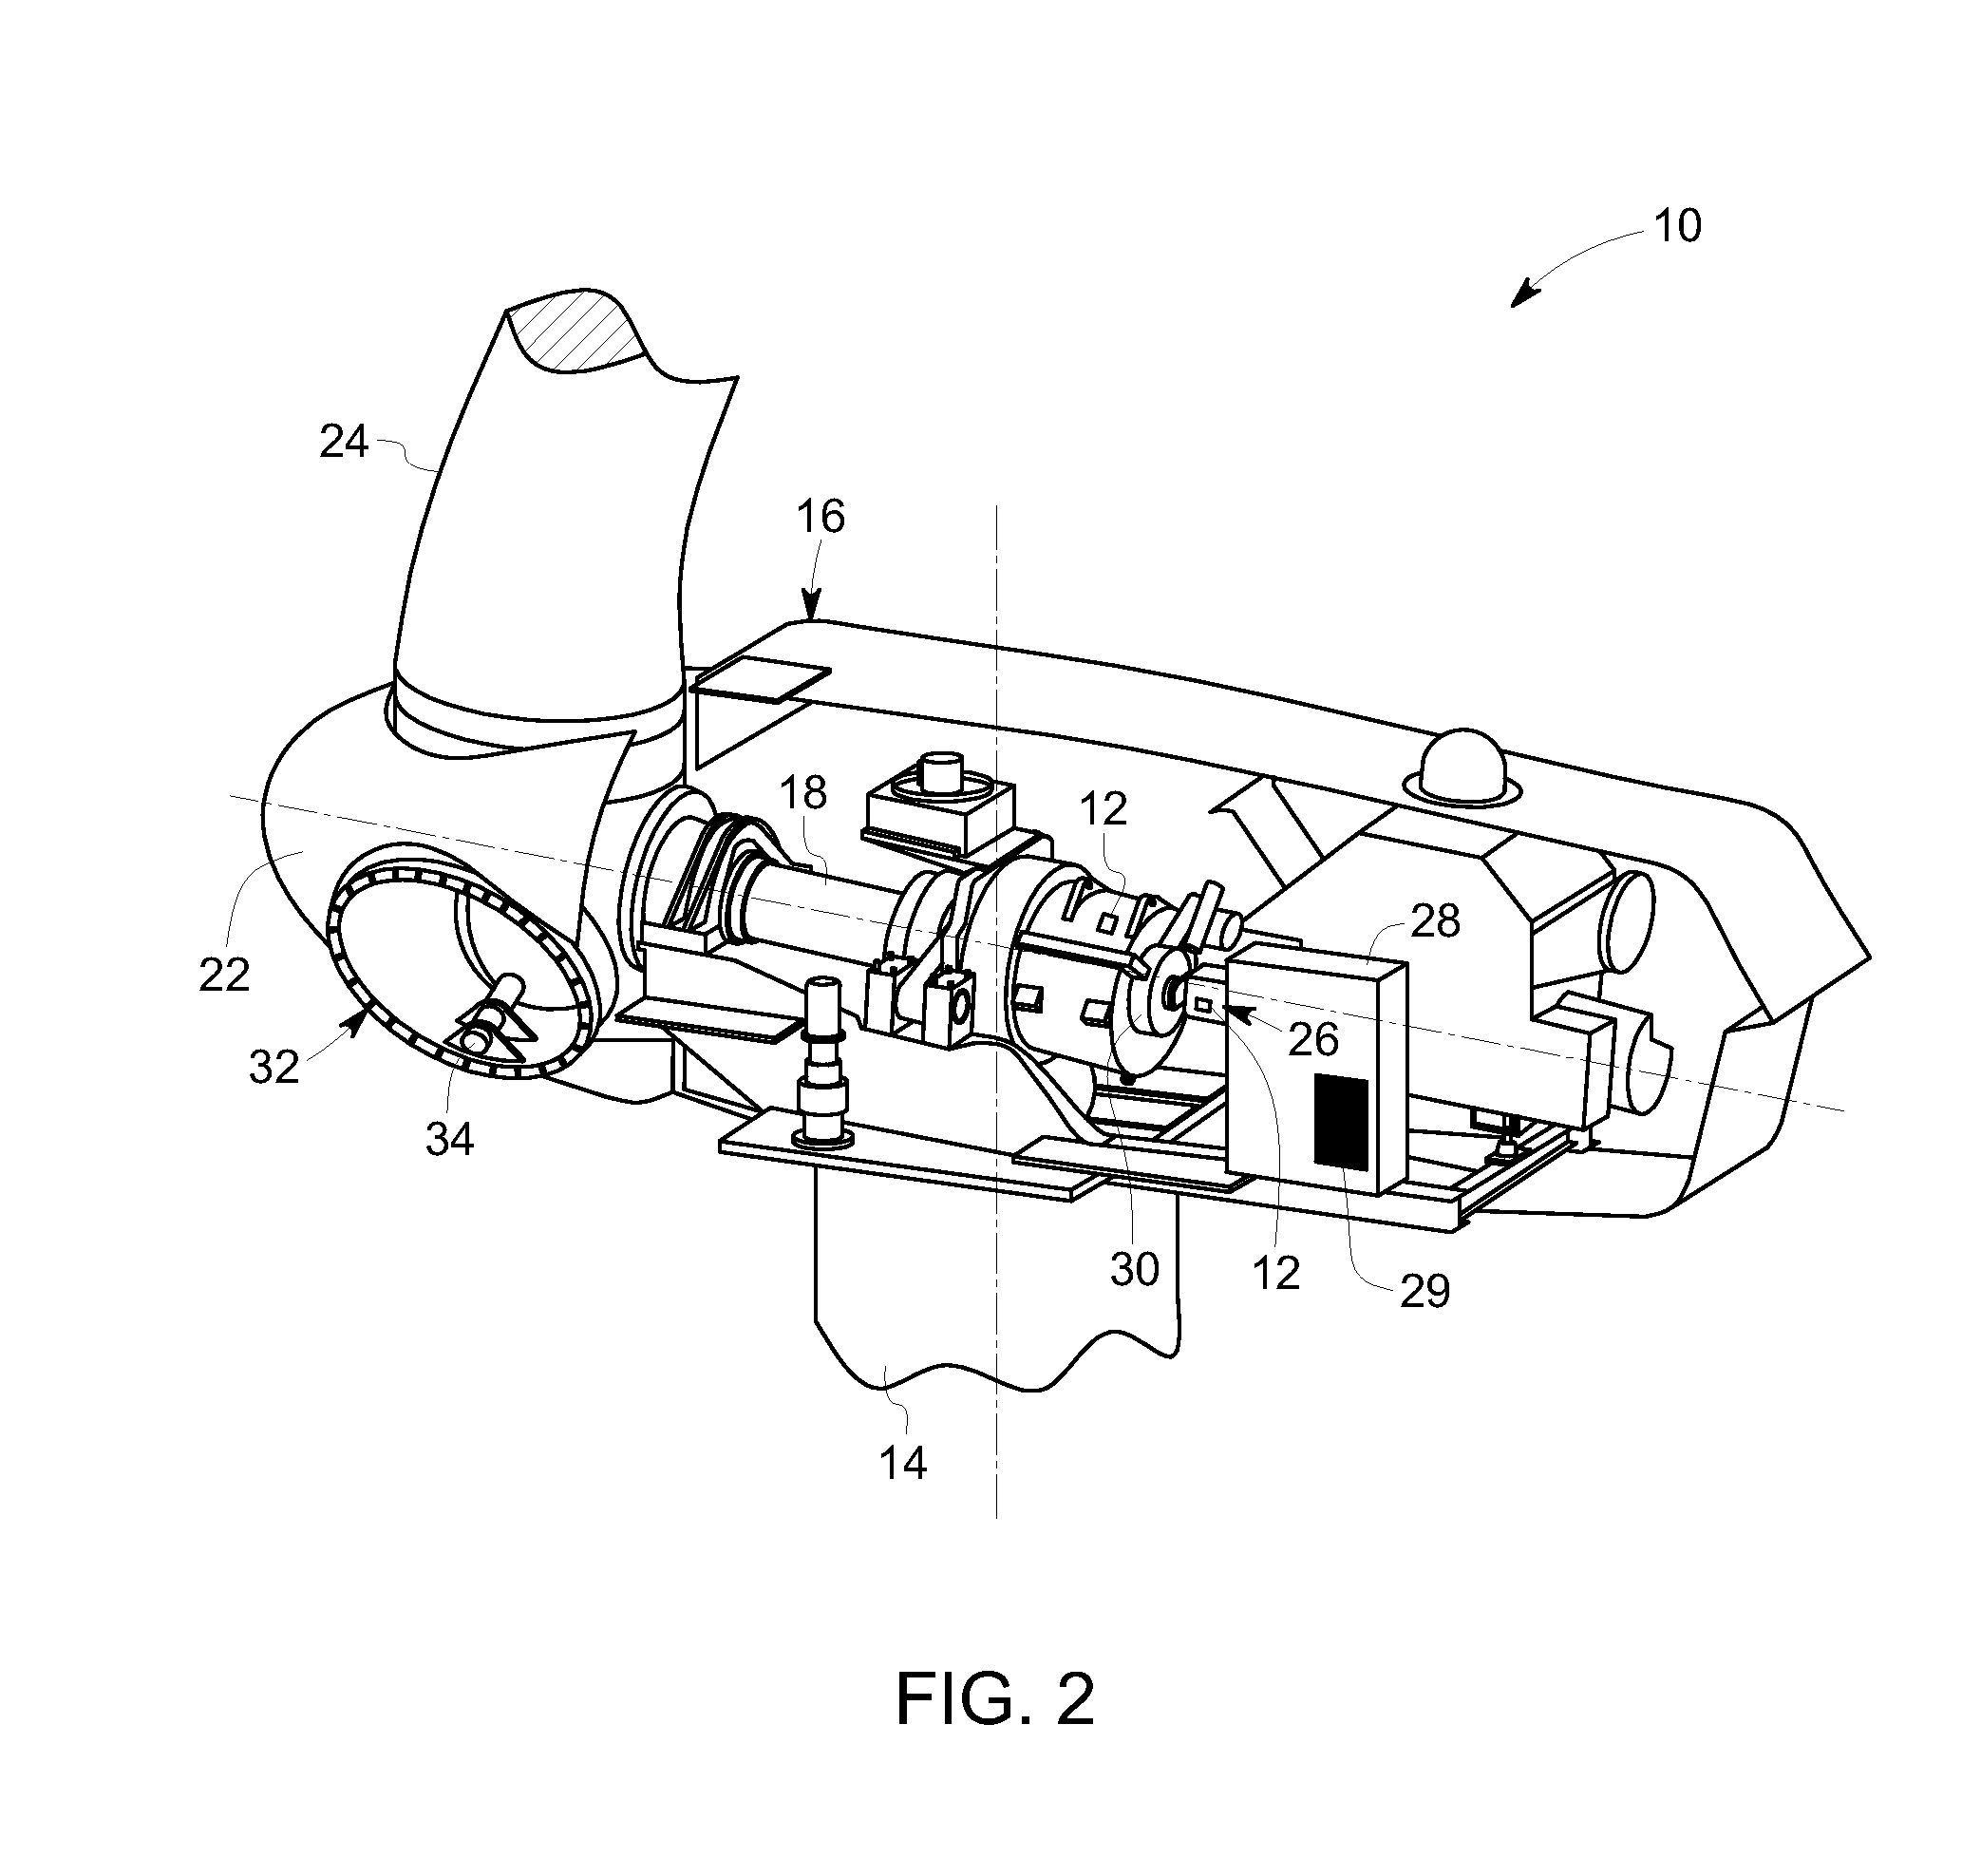 Methods and systems to operate a wind turbine system